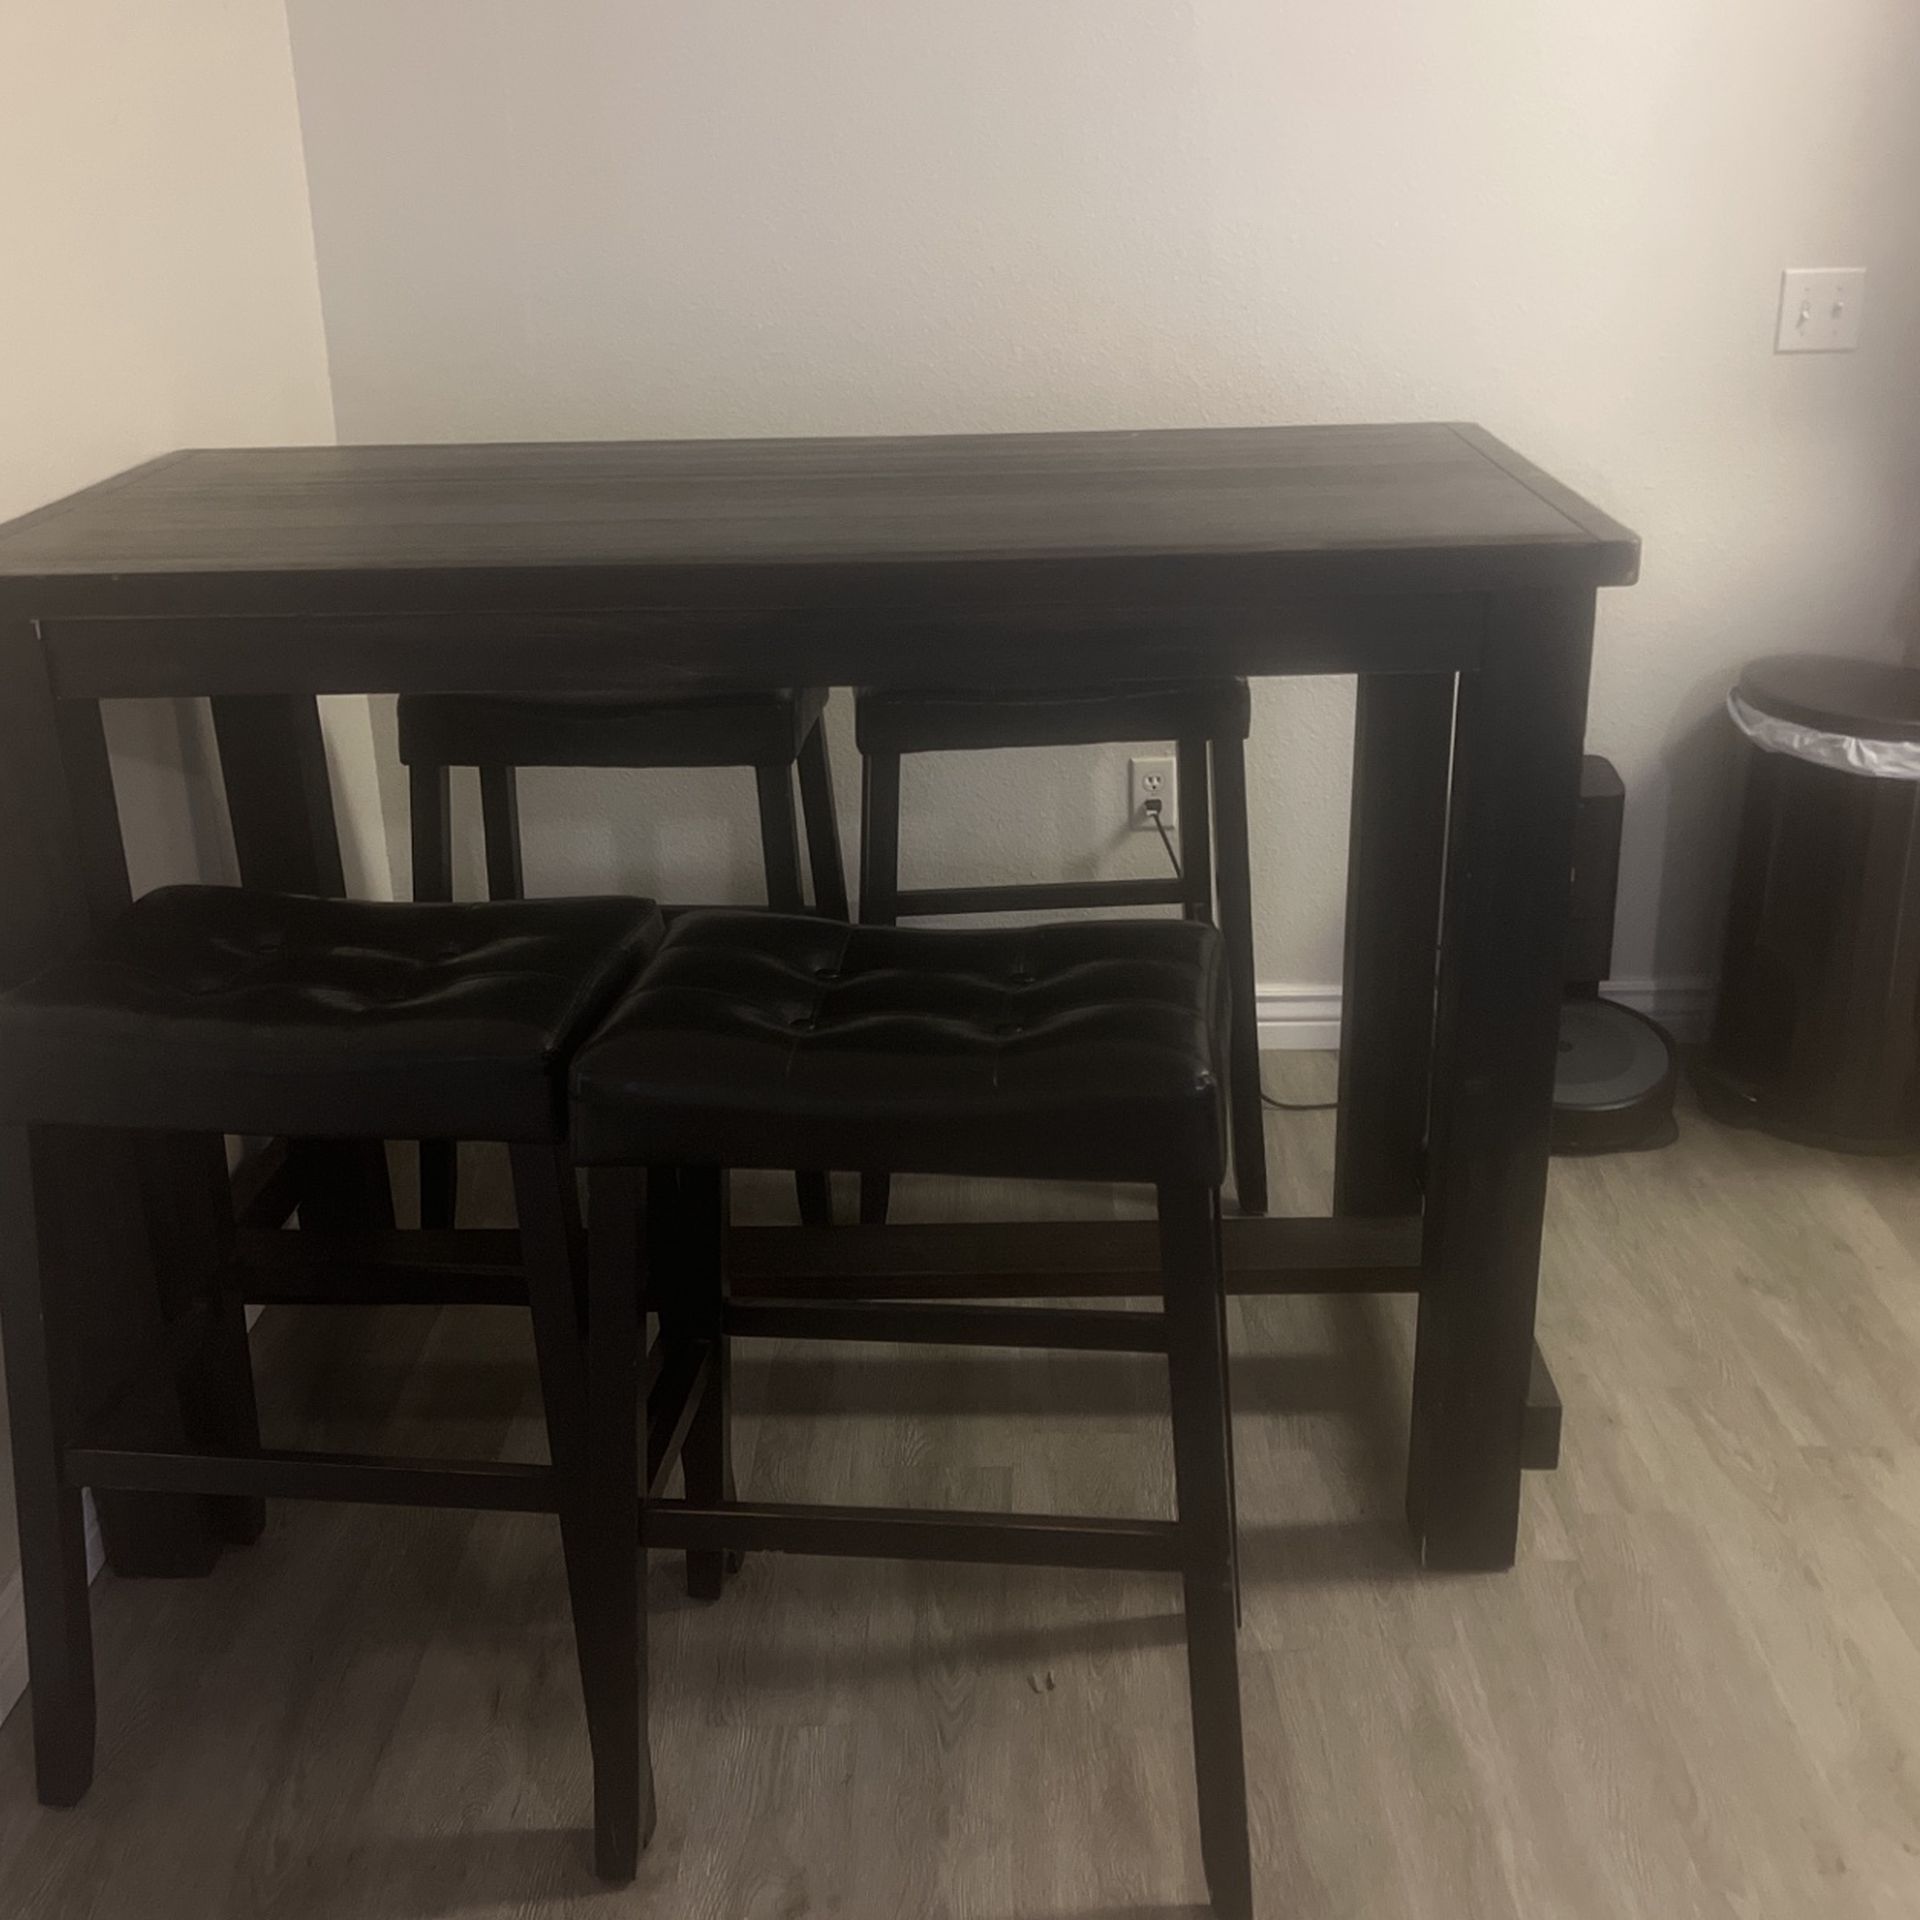 Kitchen Table And Bar Stools